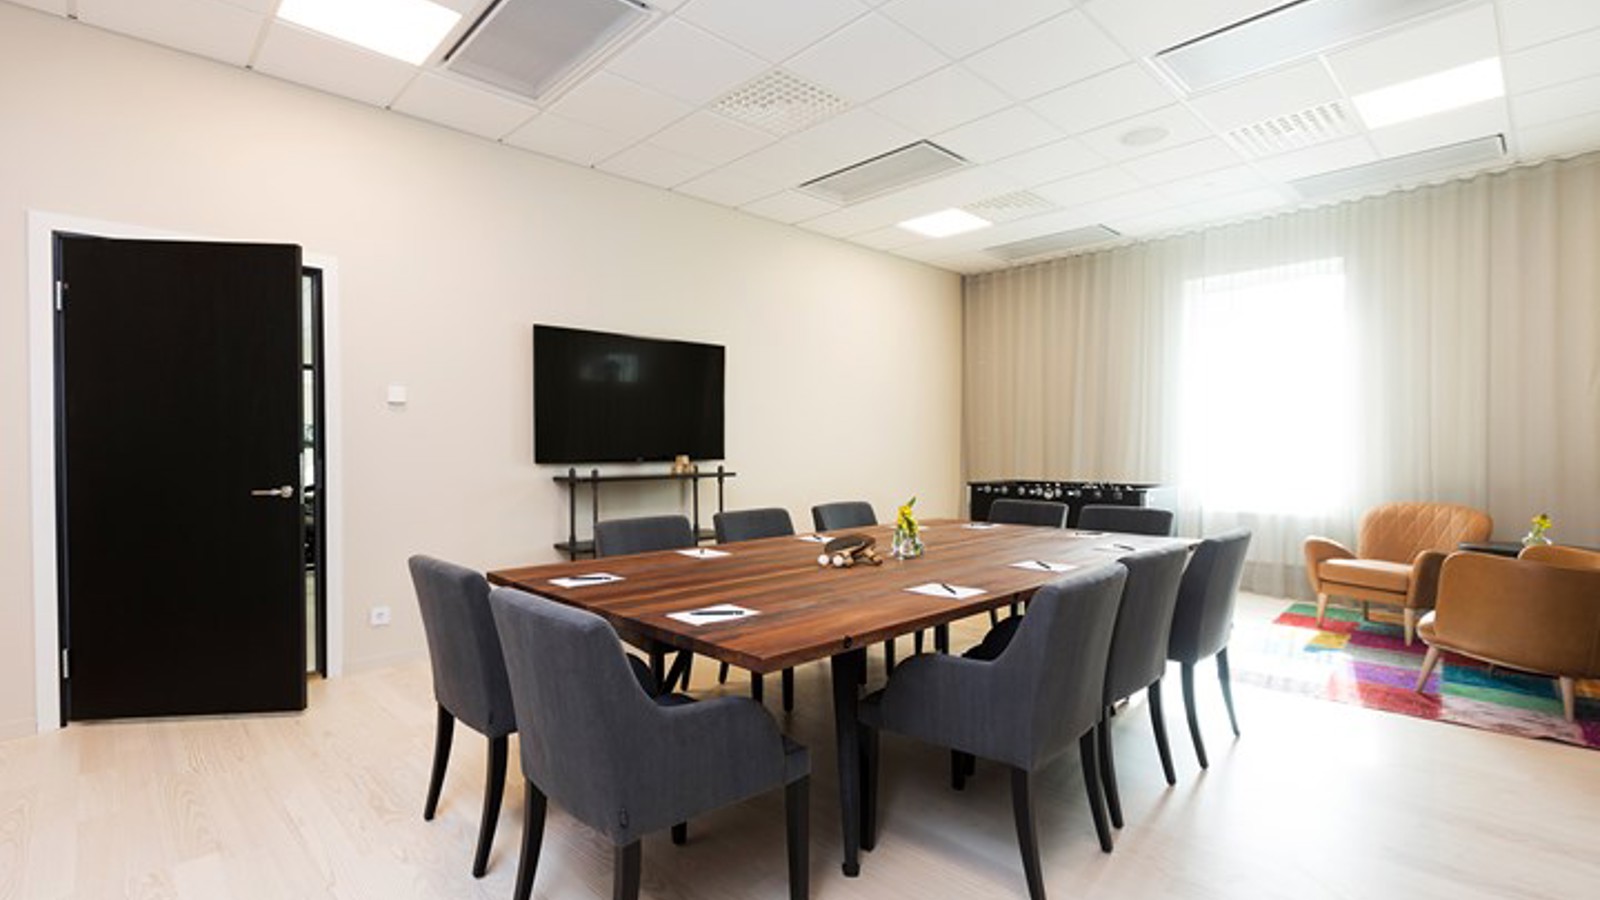 Conference room with board seating, wooden table and light walls